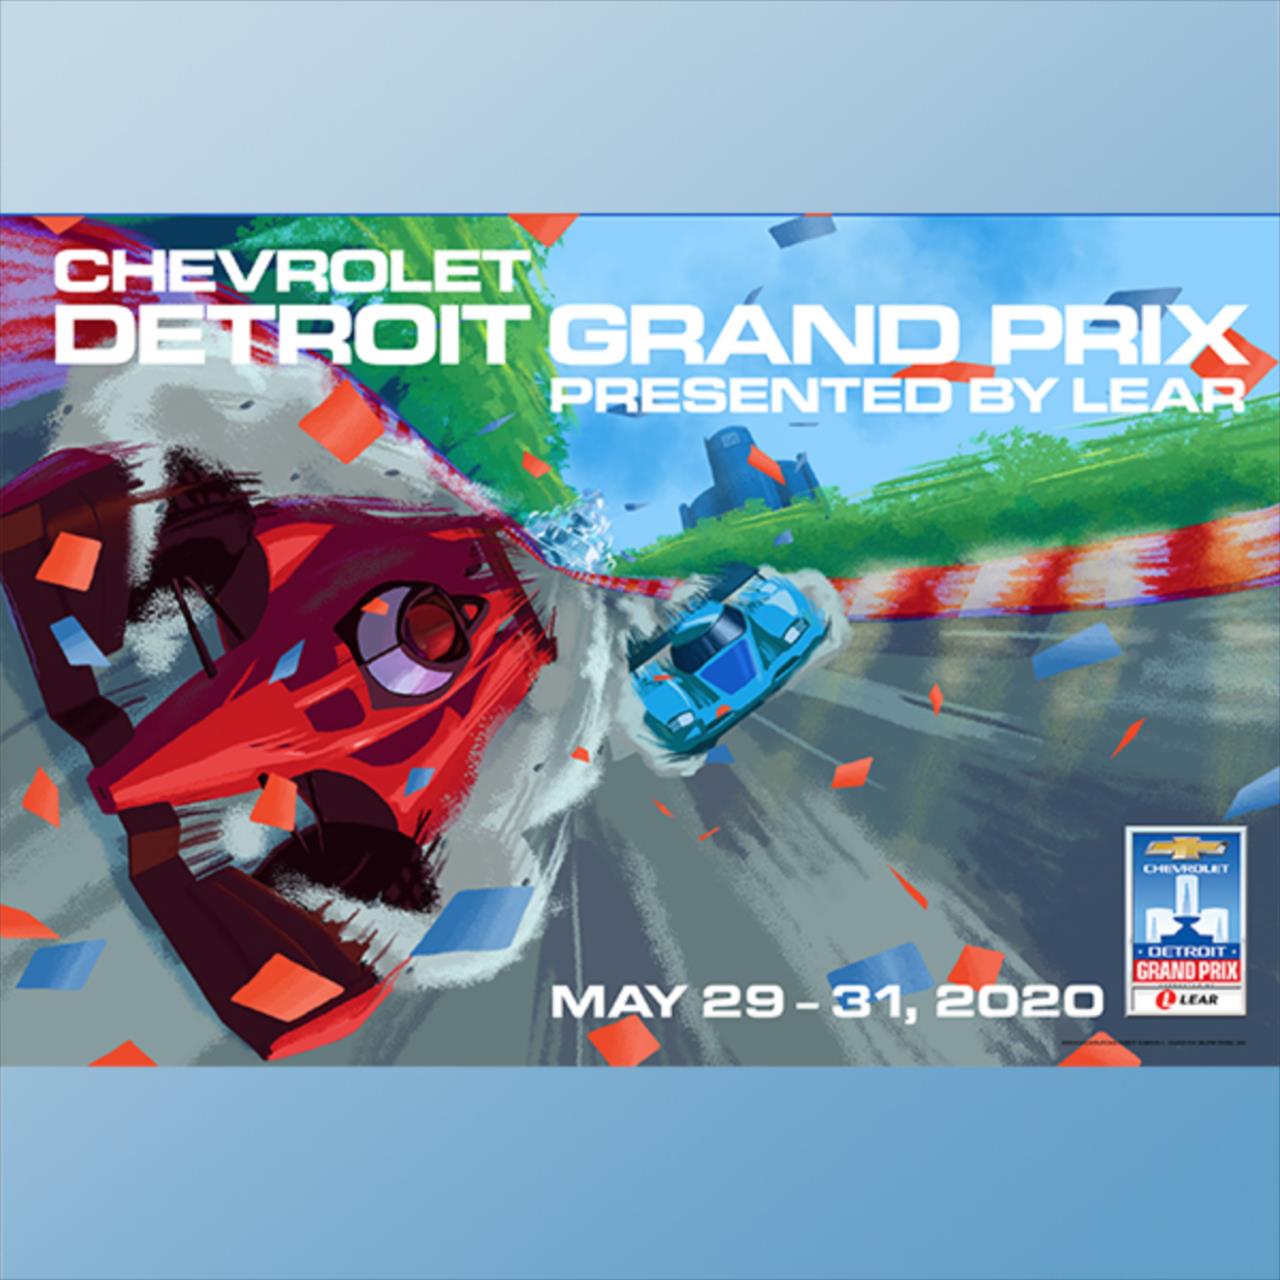 View Detroit Grand Prix Posters Through The Years Photos